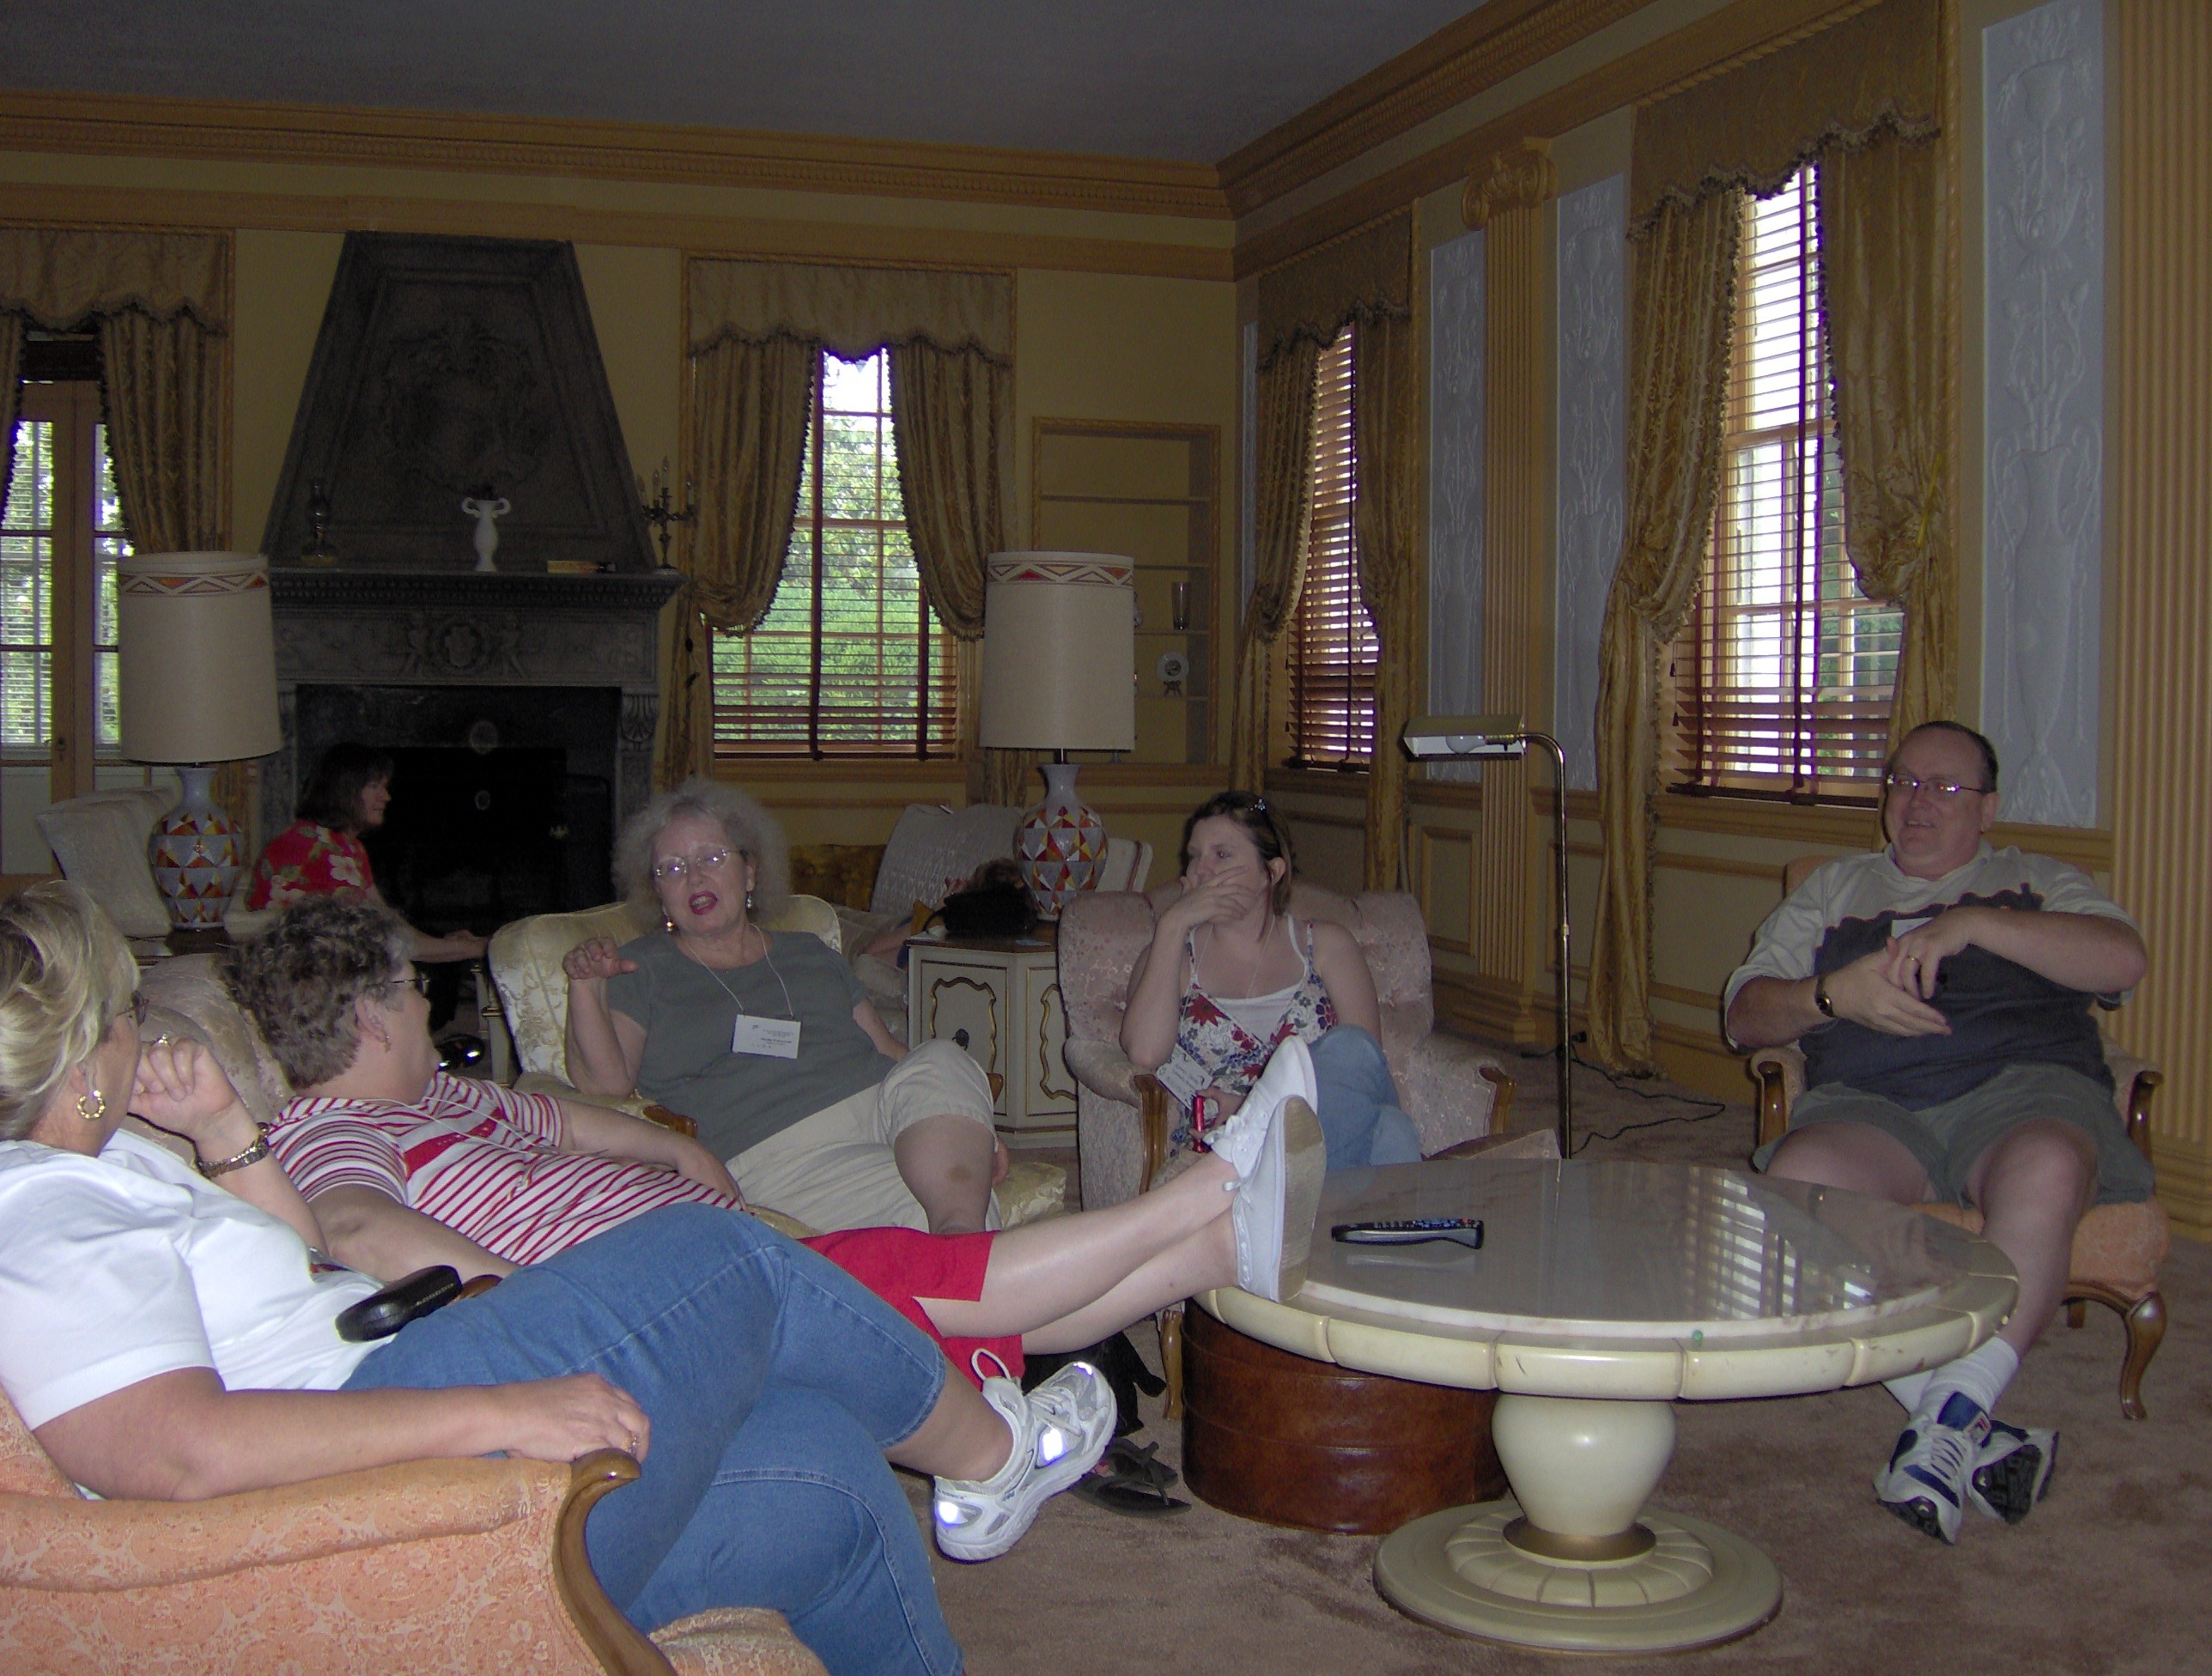 2007 OFHS Meeting in Charlottesville, VA (Some OFHS members relaxing inside Tiverton - Frederick Owsley House